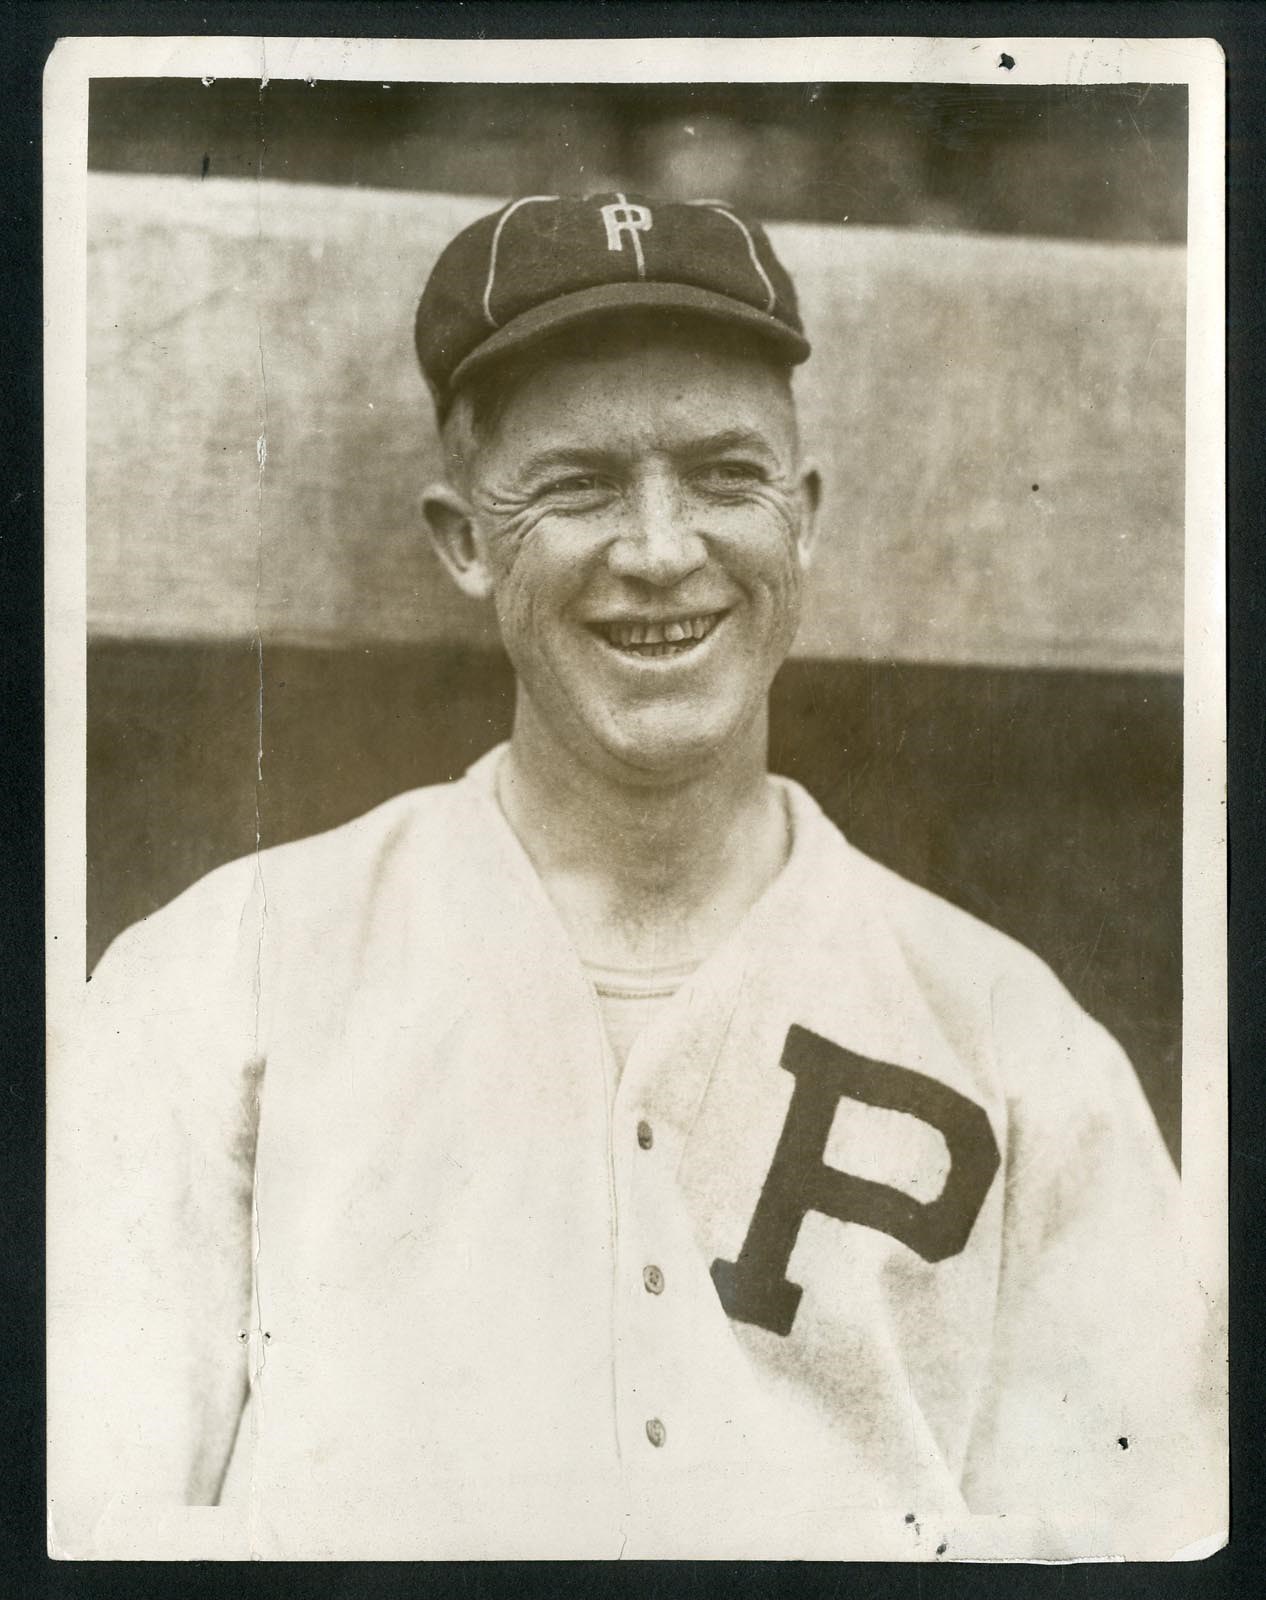 Vintage Sports Photographs - Early Grover Cleveland Alexander Photo From "The Ring"